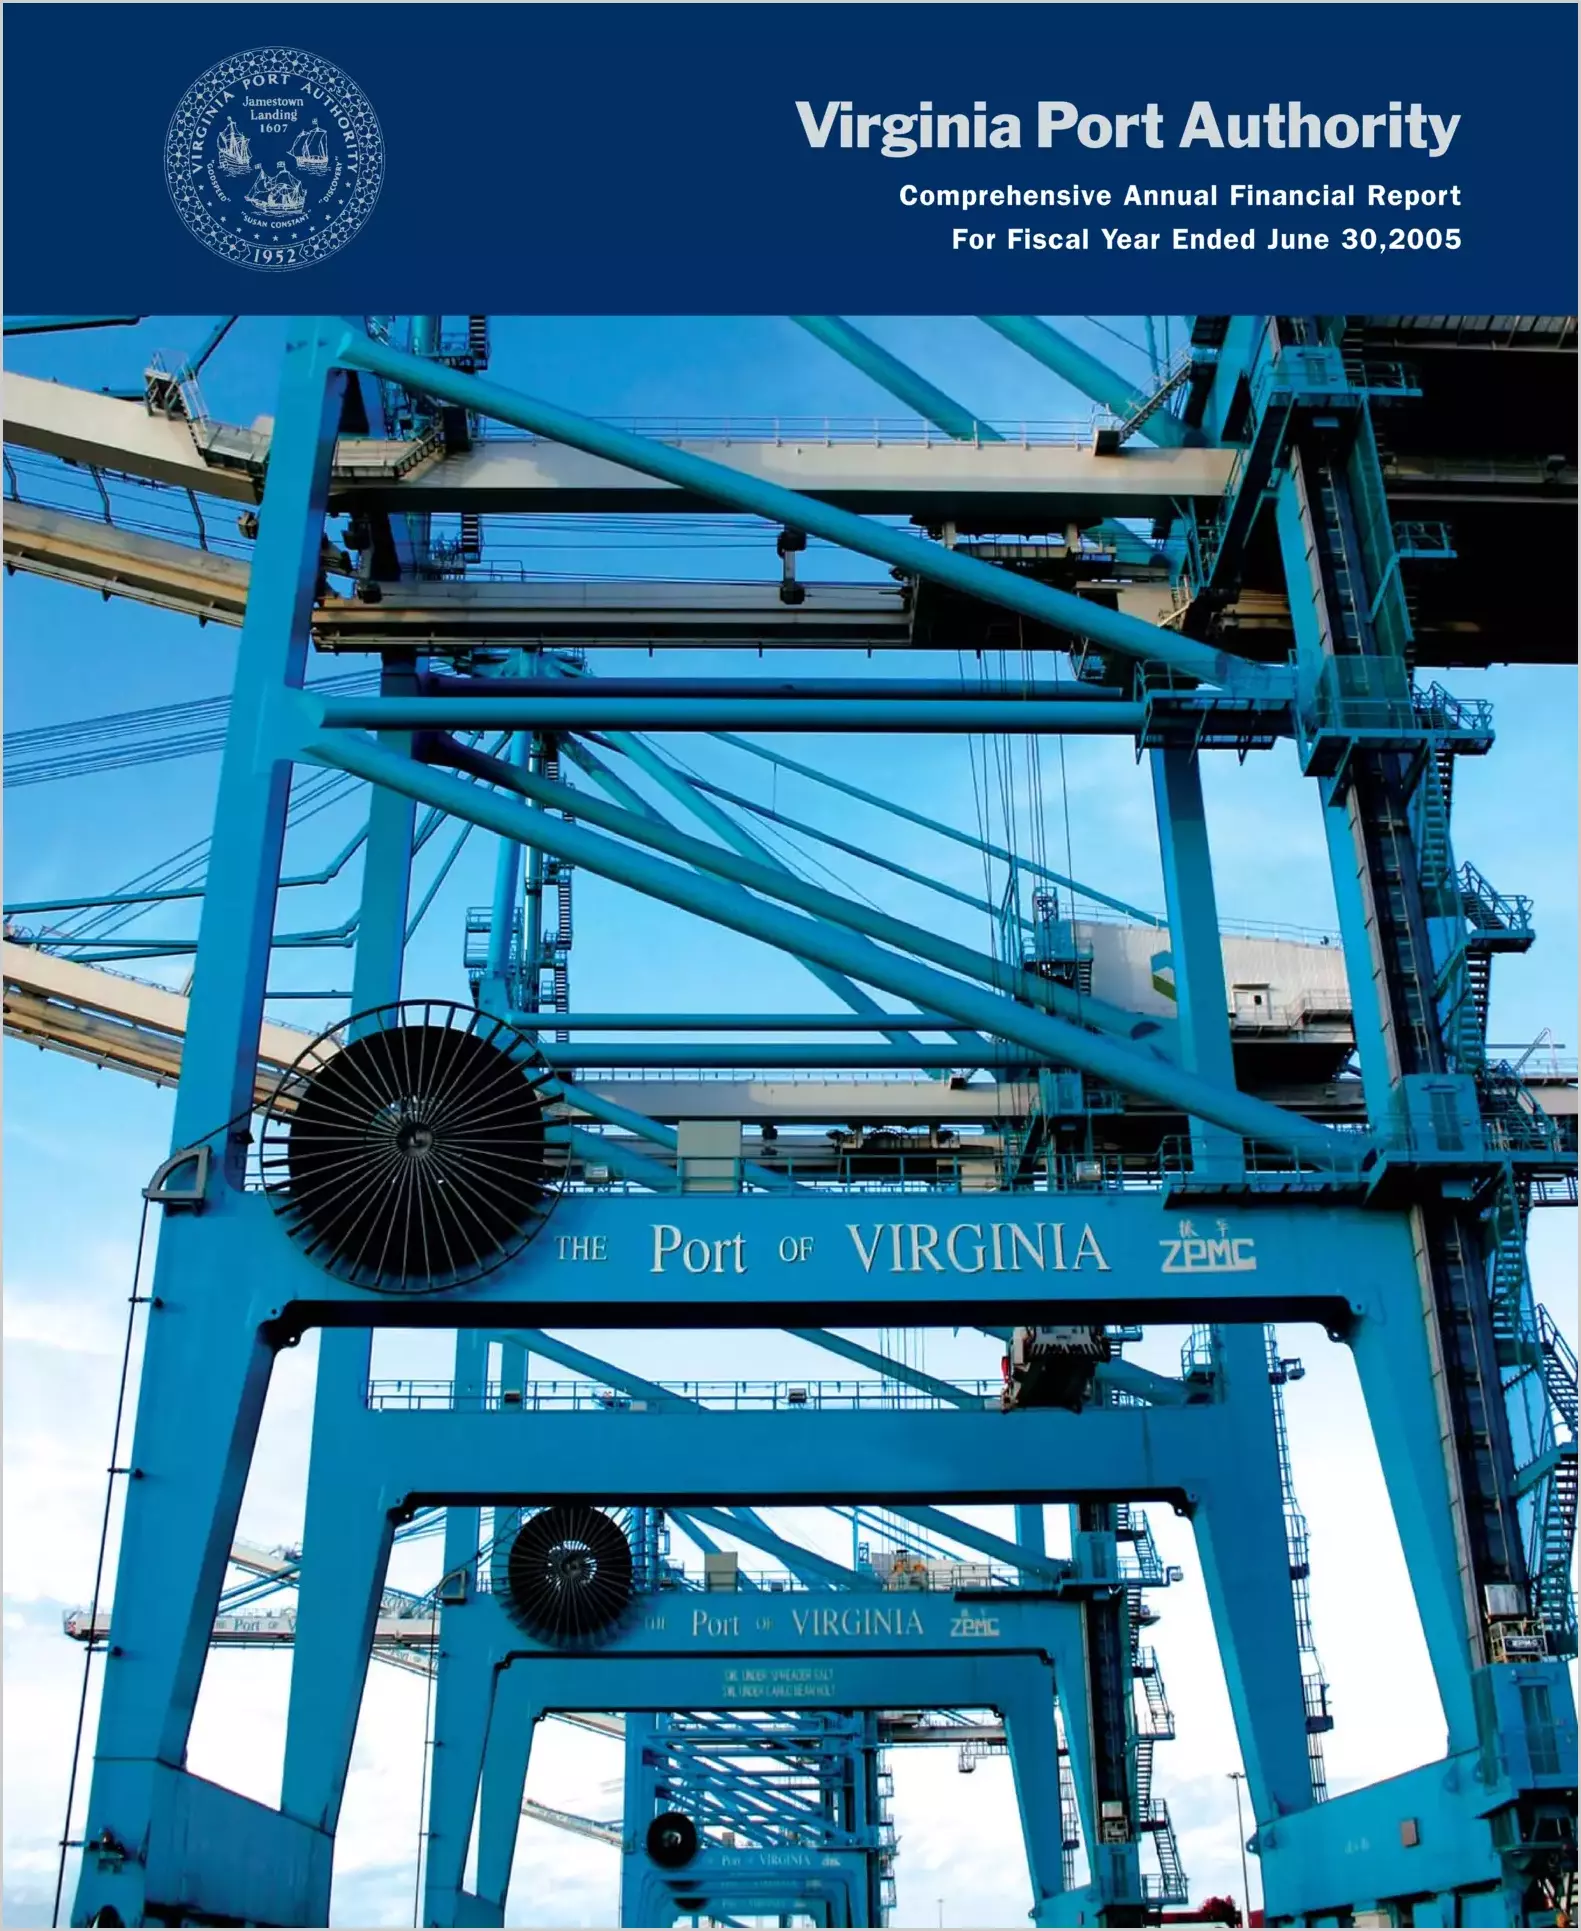 Virginia Port Authority Annual Financial Report for the year ended June 30, 2005